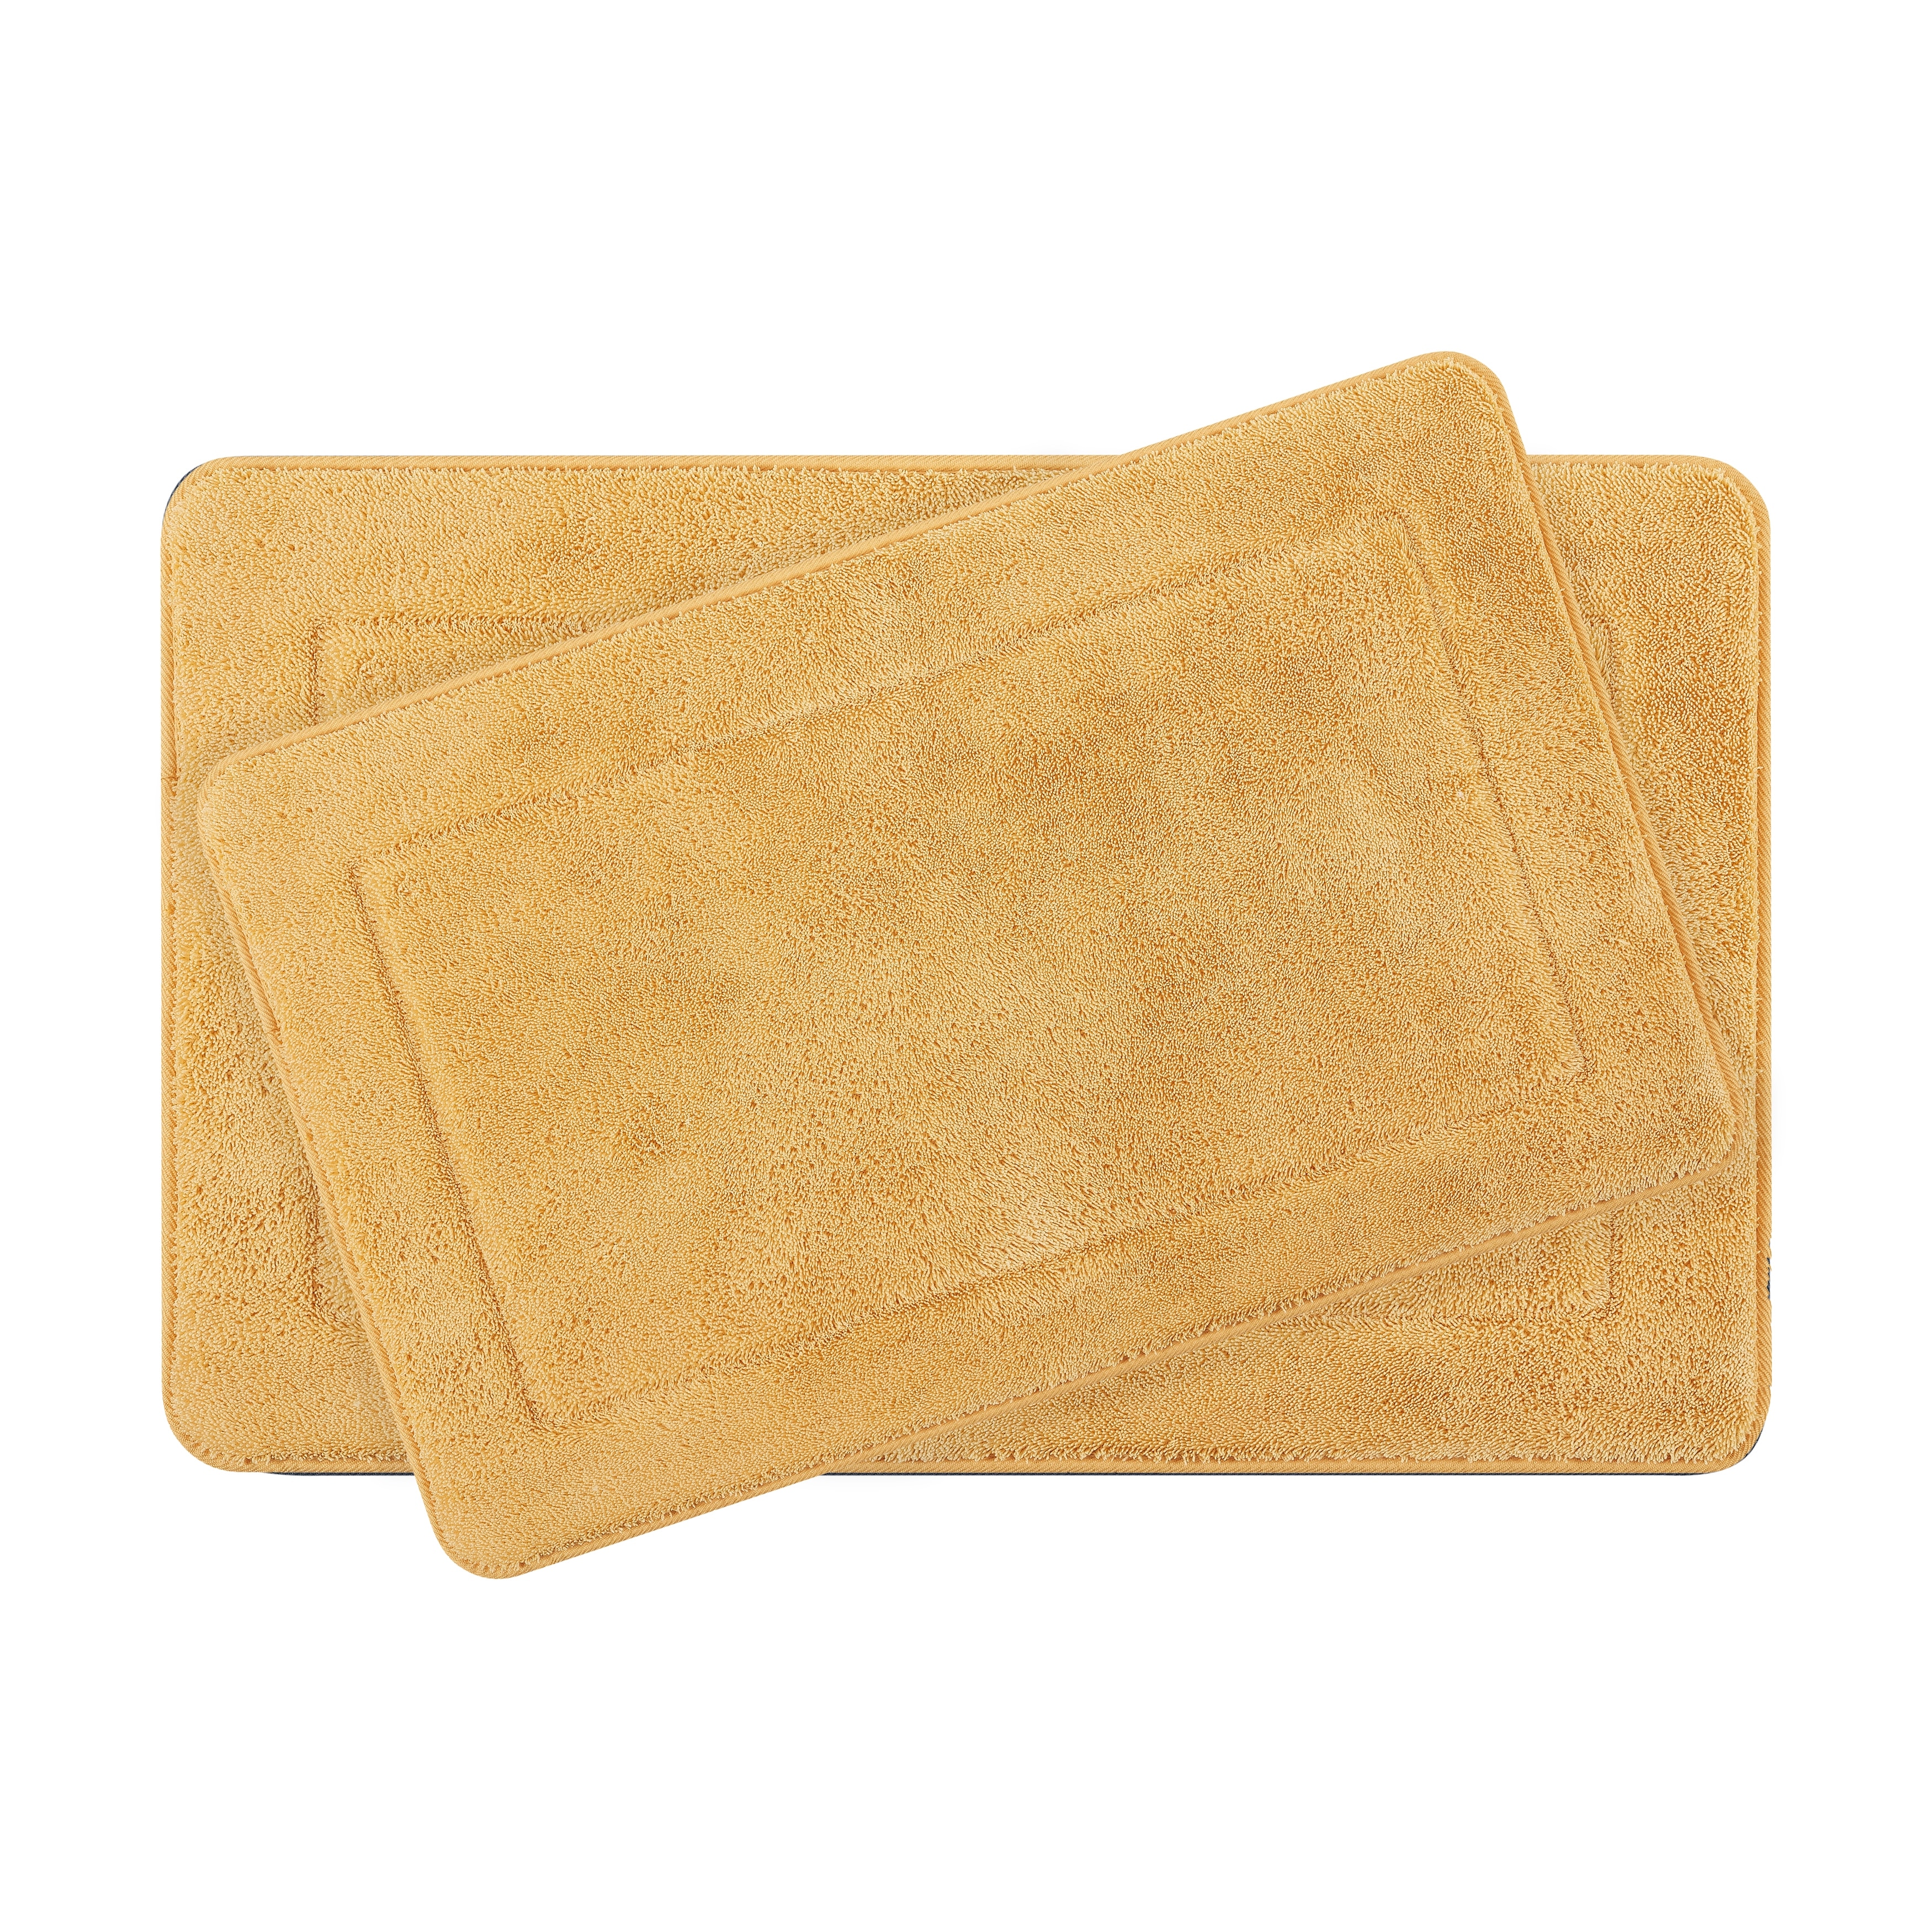  Oliver Brown - Terry Bath Mats, Set of 2 Memory Foam Bath Rugs,  Non-Slip, 100% Polyester, Premium Bathroom Décor, Machine Washable,  Measures 17 in. x 24 in. / 24 in. x